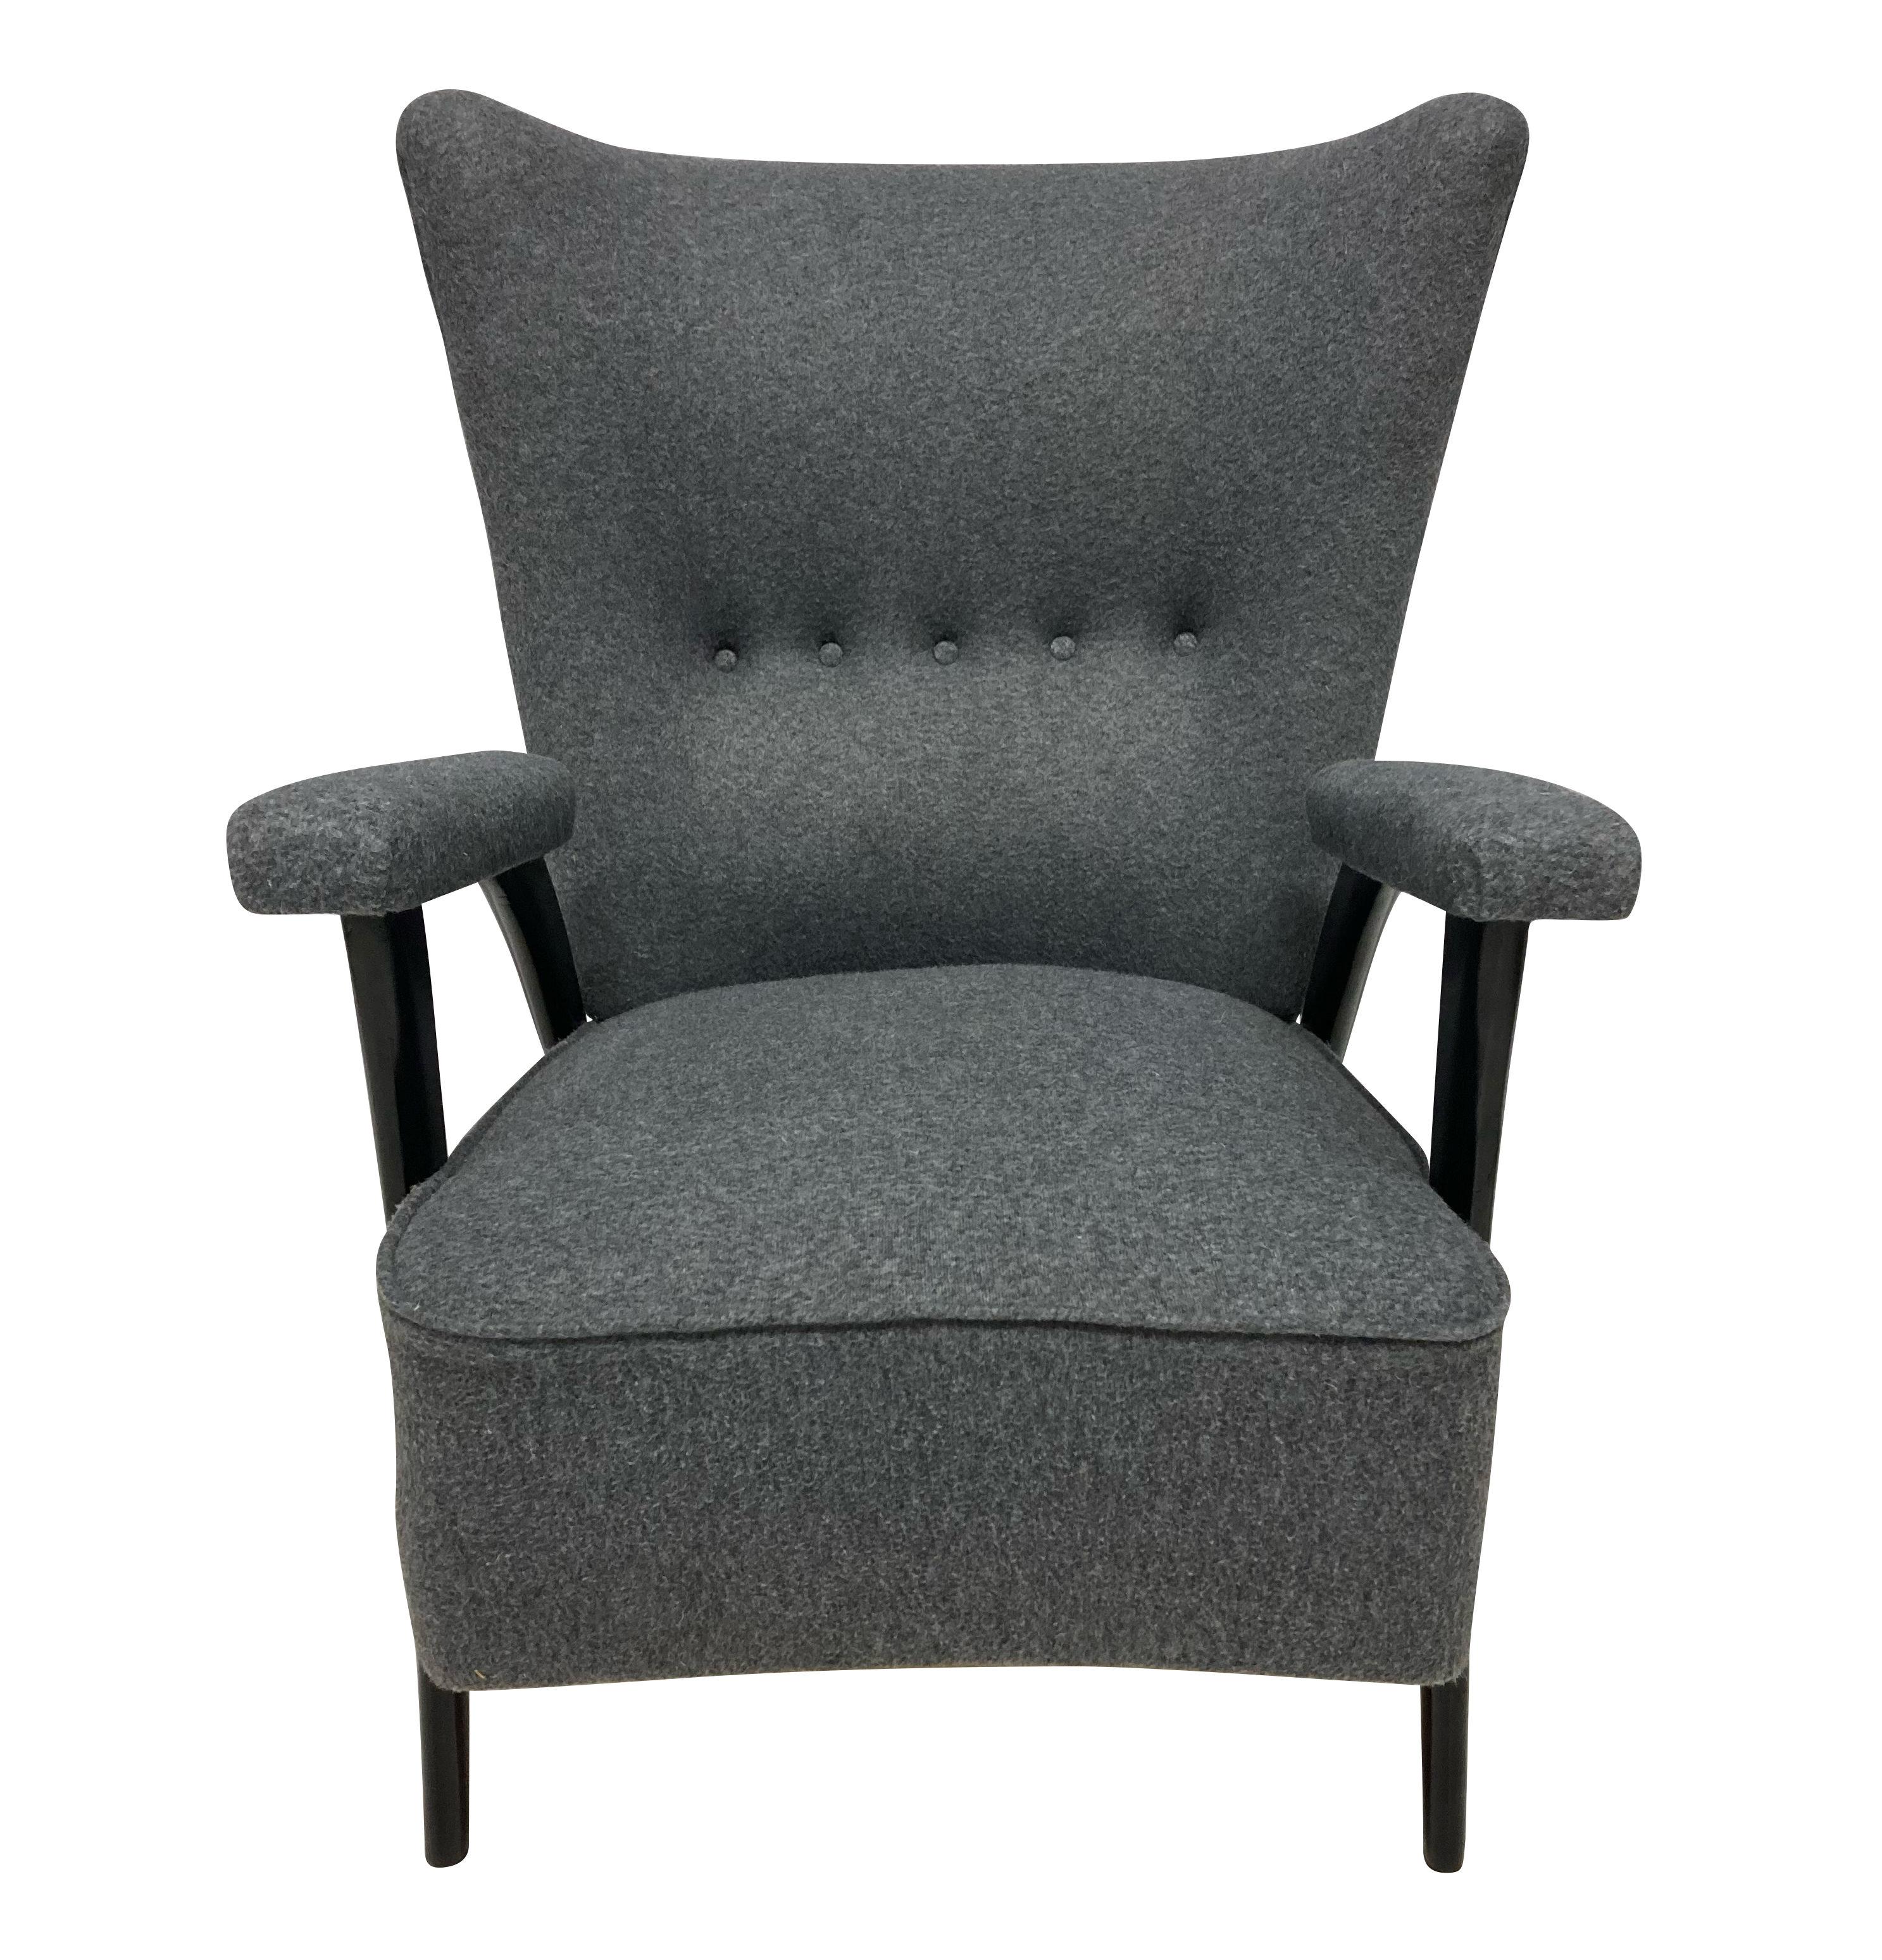 An Italian armchair of elegant design by Paolo Buffa. The architectural ebonised legs supporting a comfortable sprung seat and curved back, newly upholstered in grey wool.